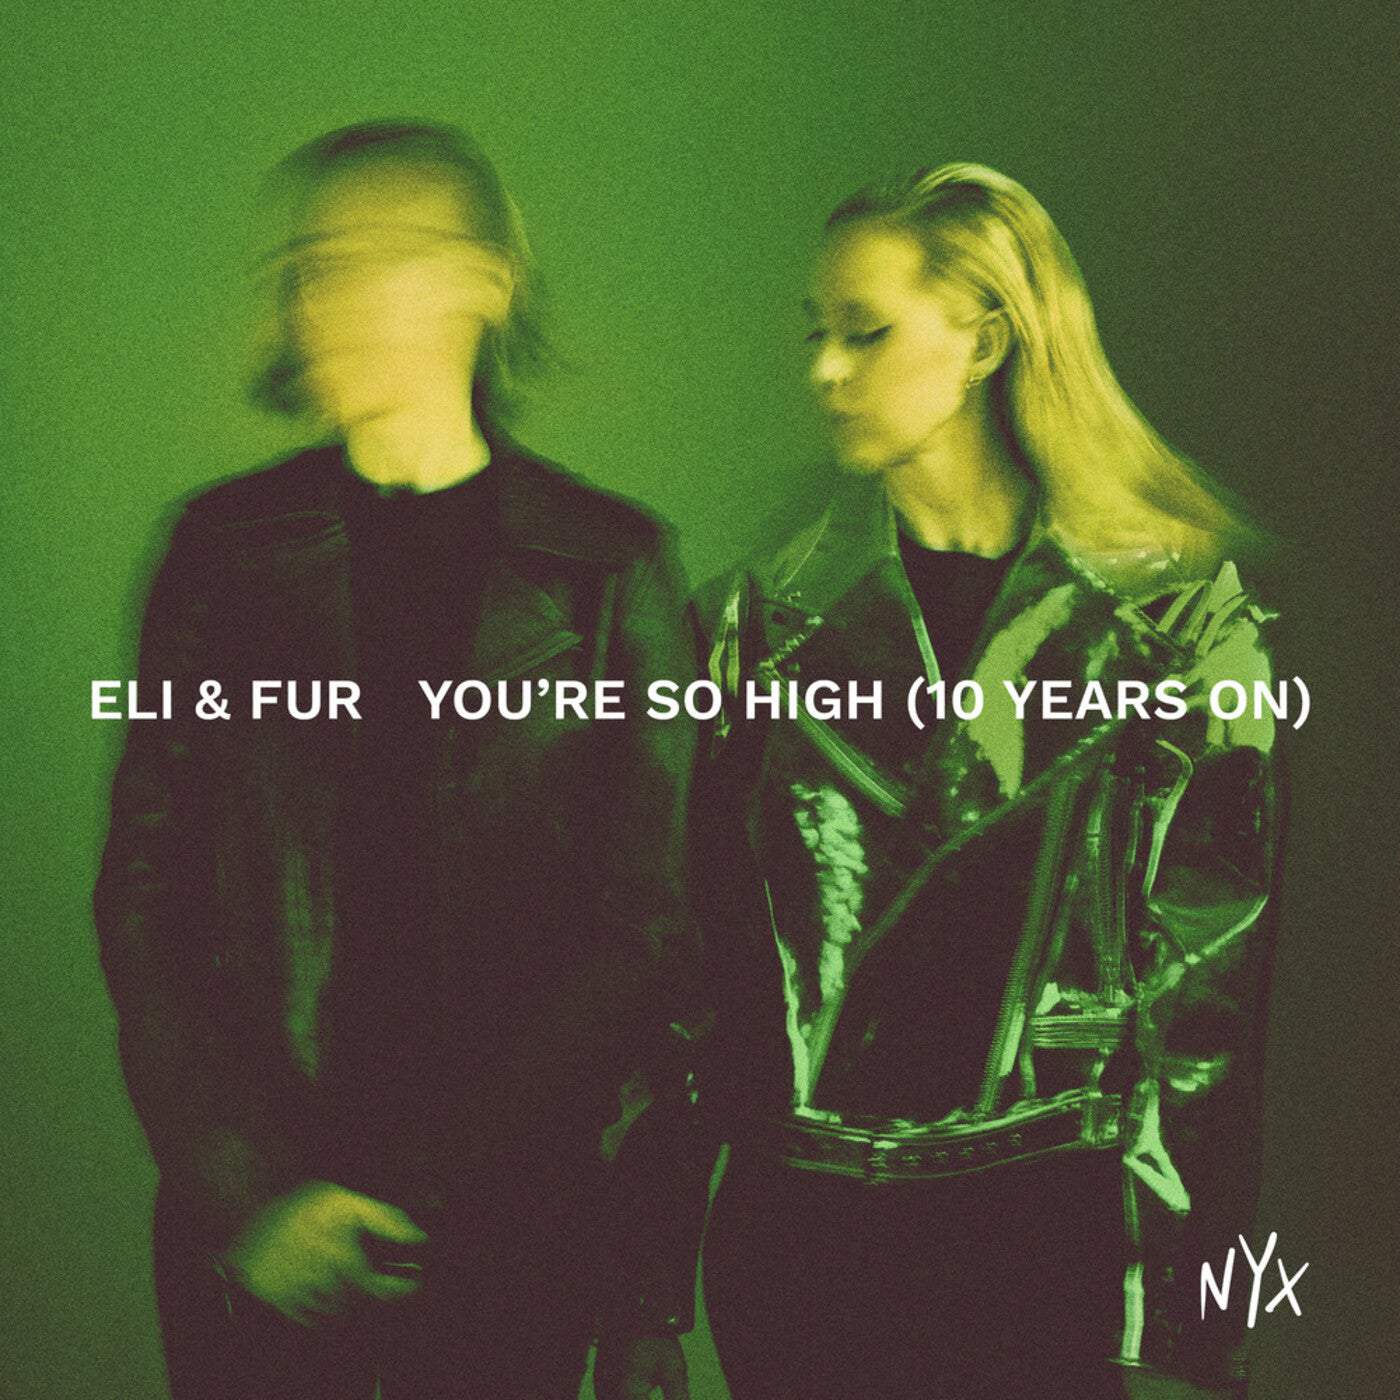 image cover: You're So High (10 Years On) by Eli & Fur on NYX Music